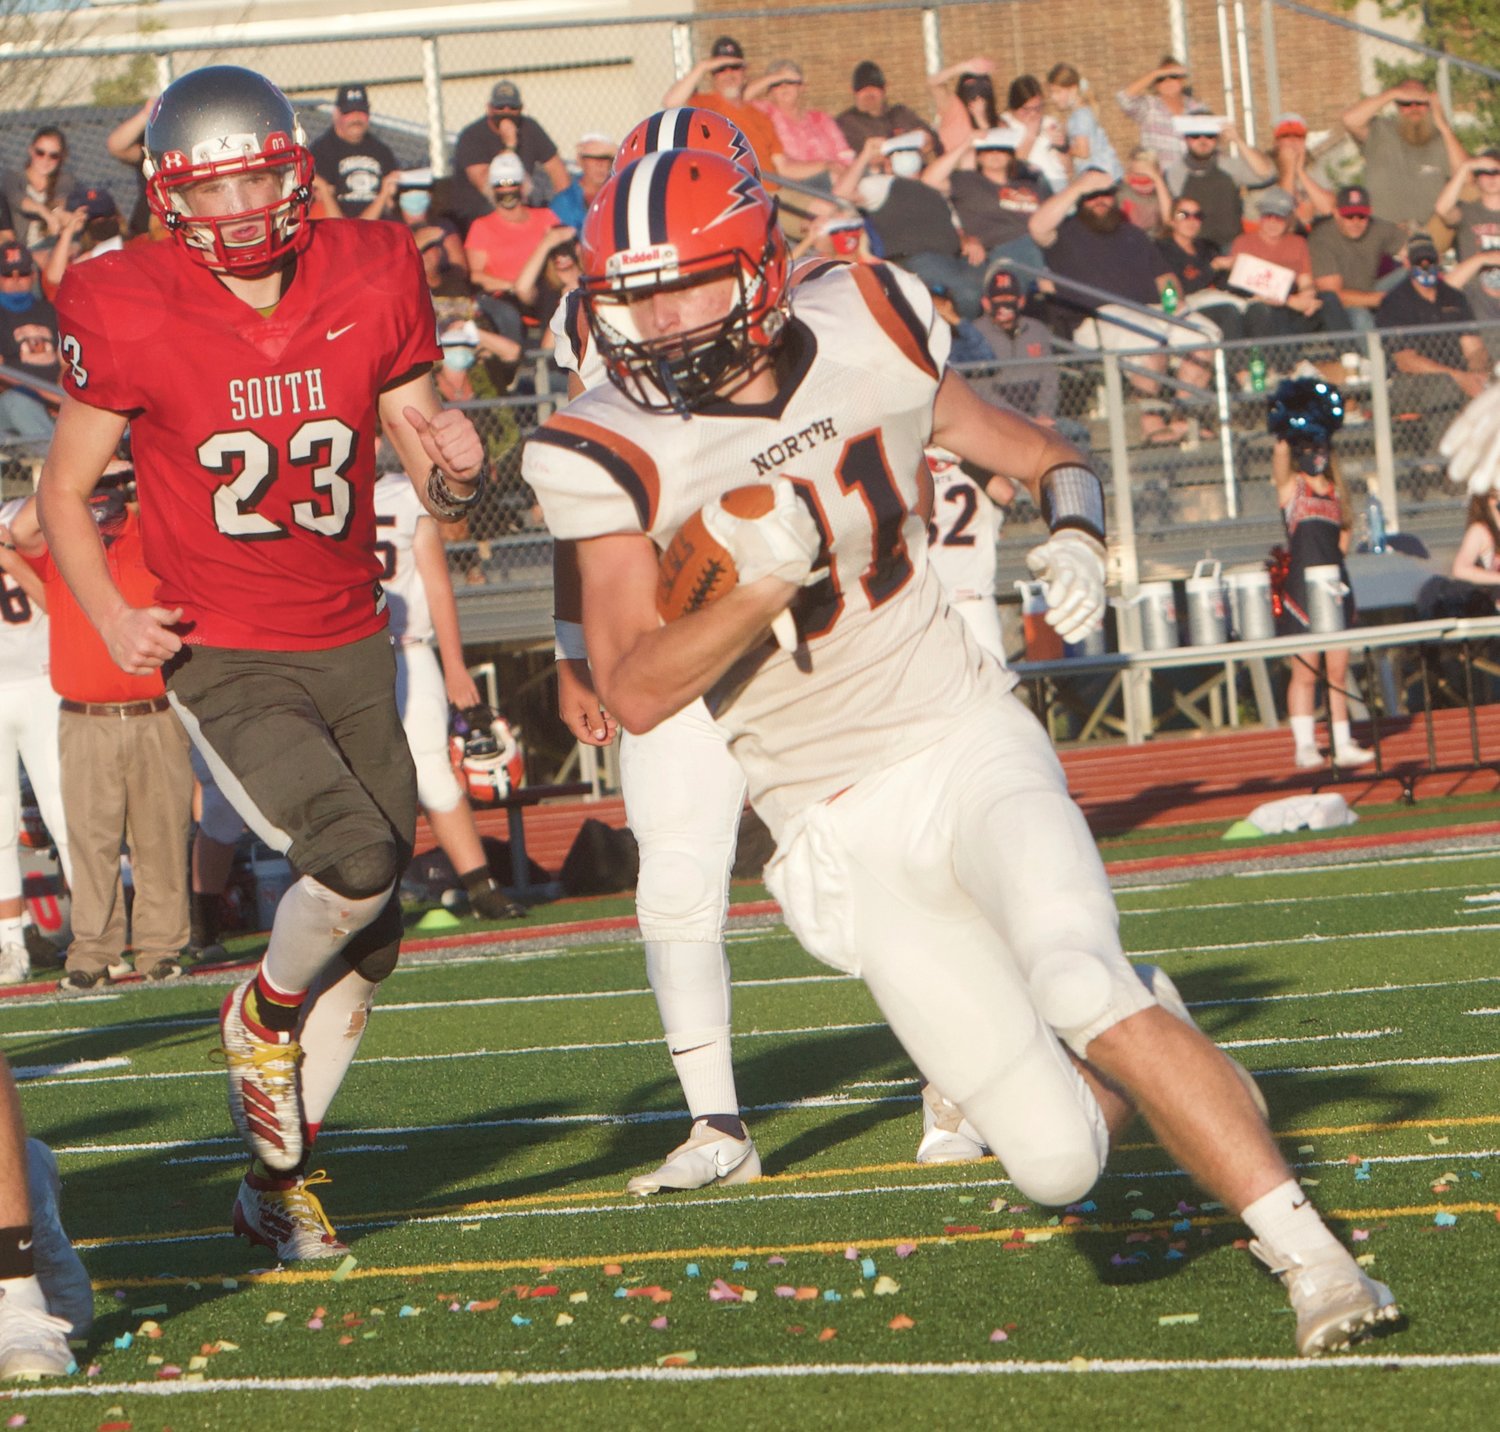 North Montgomery's Zak Searle led the Chargers with 187 rushing yards in the win over Southmont.